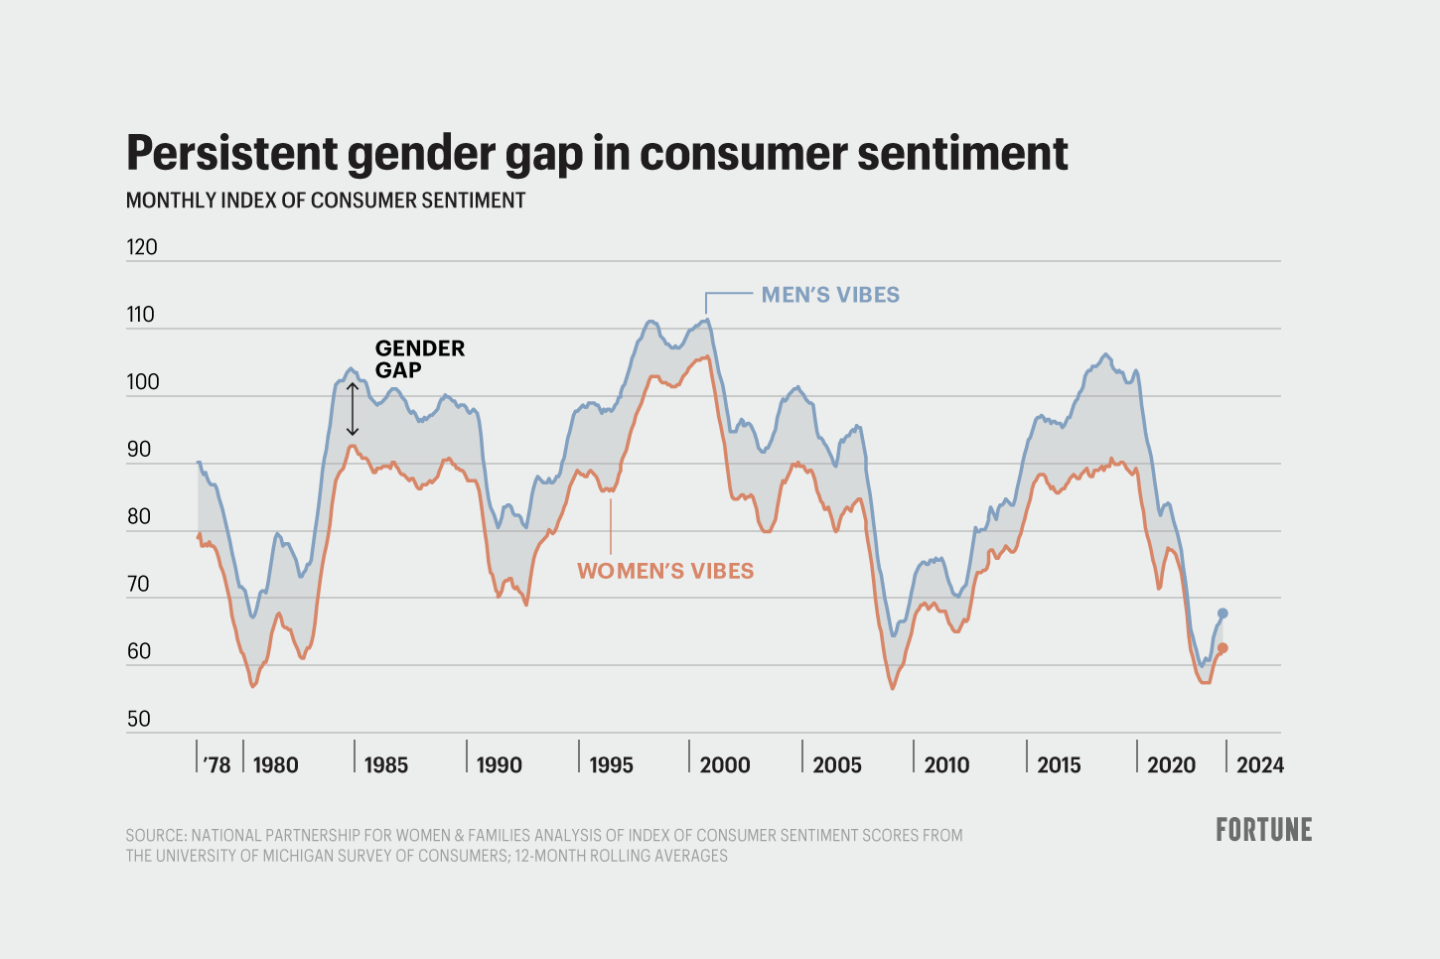 Graph title: Persistent gender gap in consumer sentiment. Line chart showing the monthly index of consumer sentiment from 1978 to 2024, with a trend of men reporting higher consumer sentiment than women.